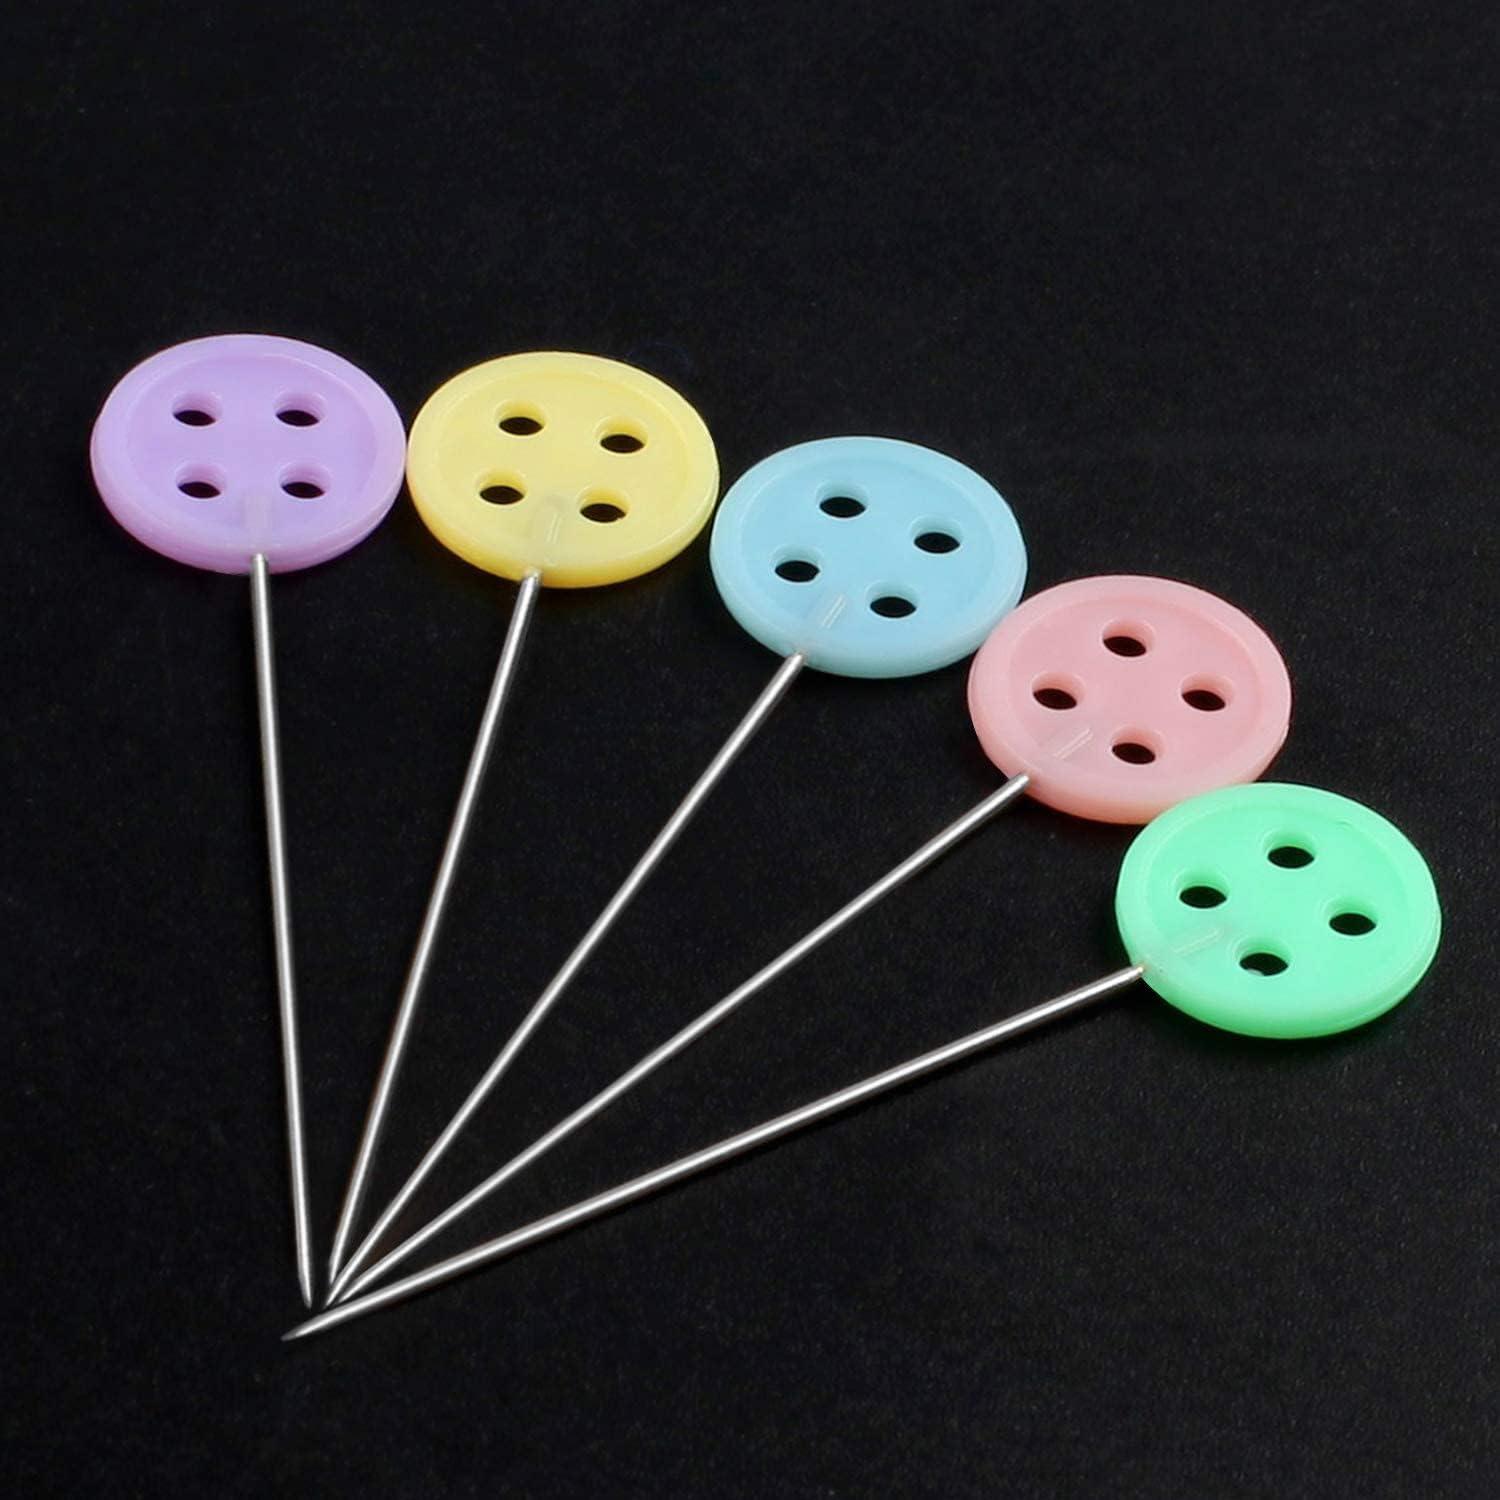 200 PCS Flat Head Pins Straight Pins Sewing Pins for Fabric Button Colored Heads  Quilting Pins Boxed for Sewing DIY (Assorted Colors) Mixed